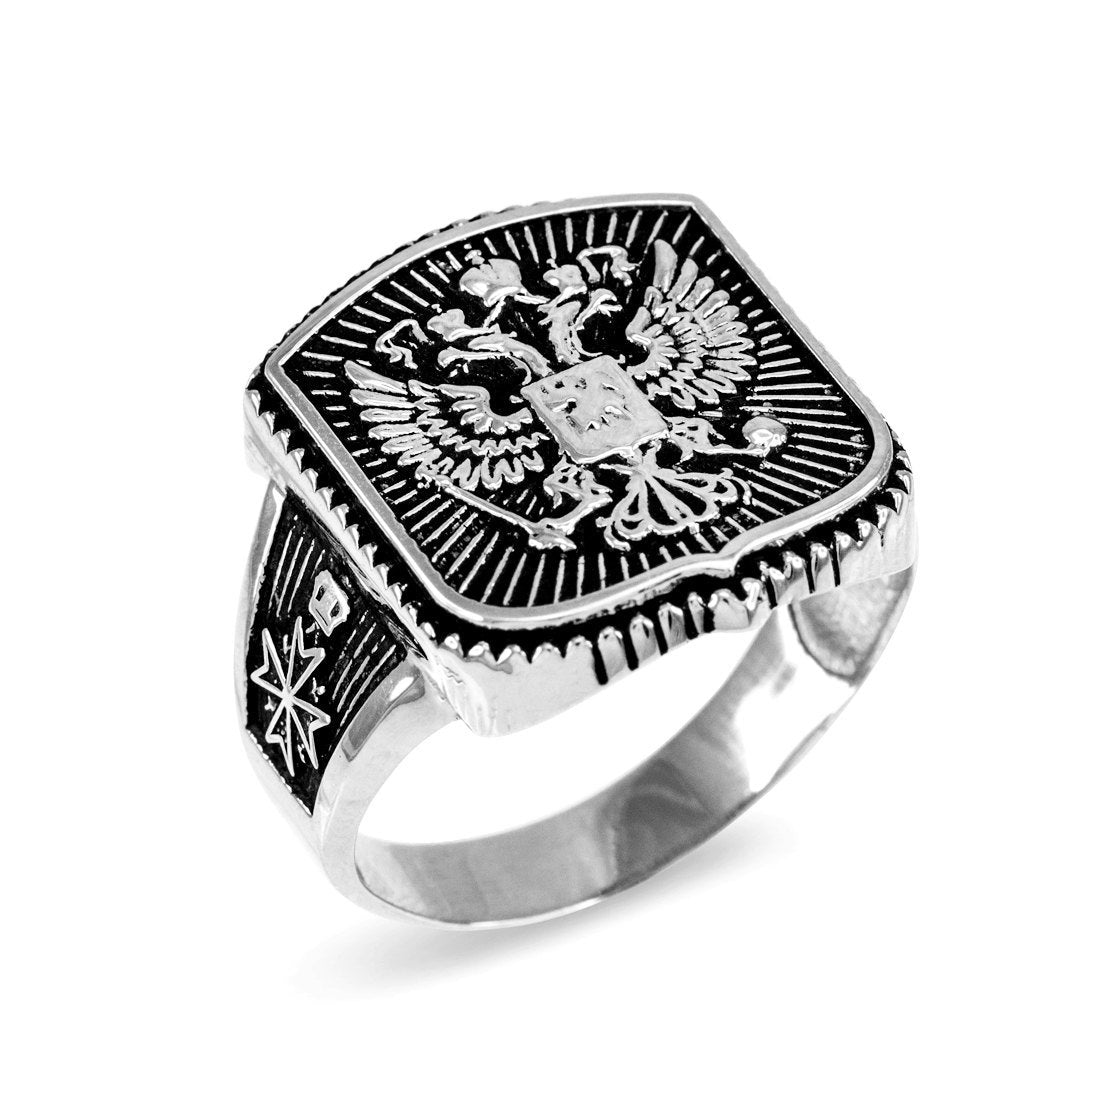 Sterling Silver Russian Imperial Crest Mens Orthodox Cross Ring Karma Blingz